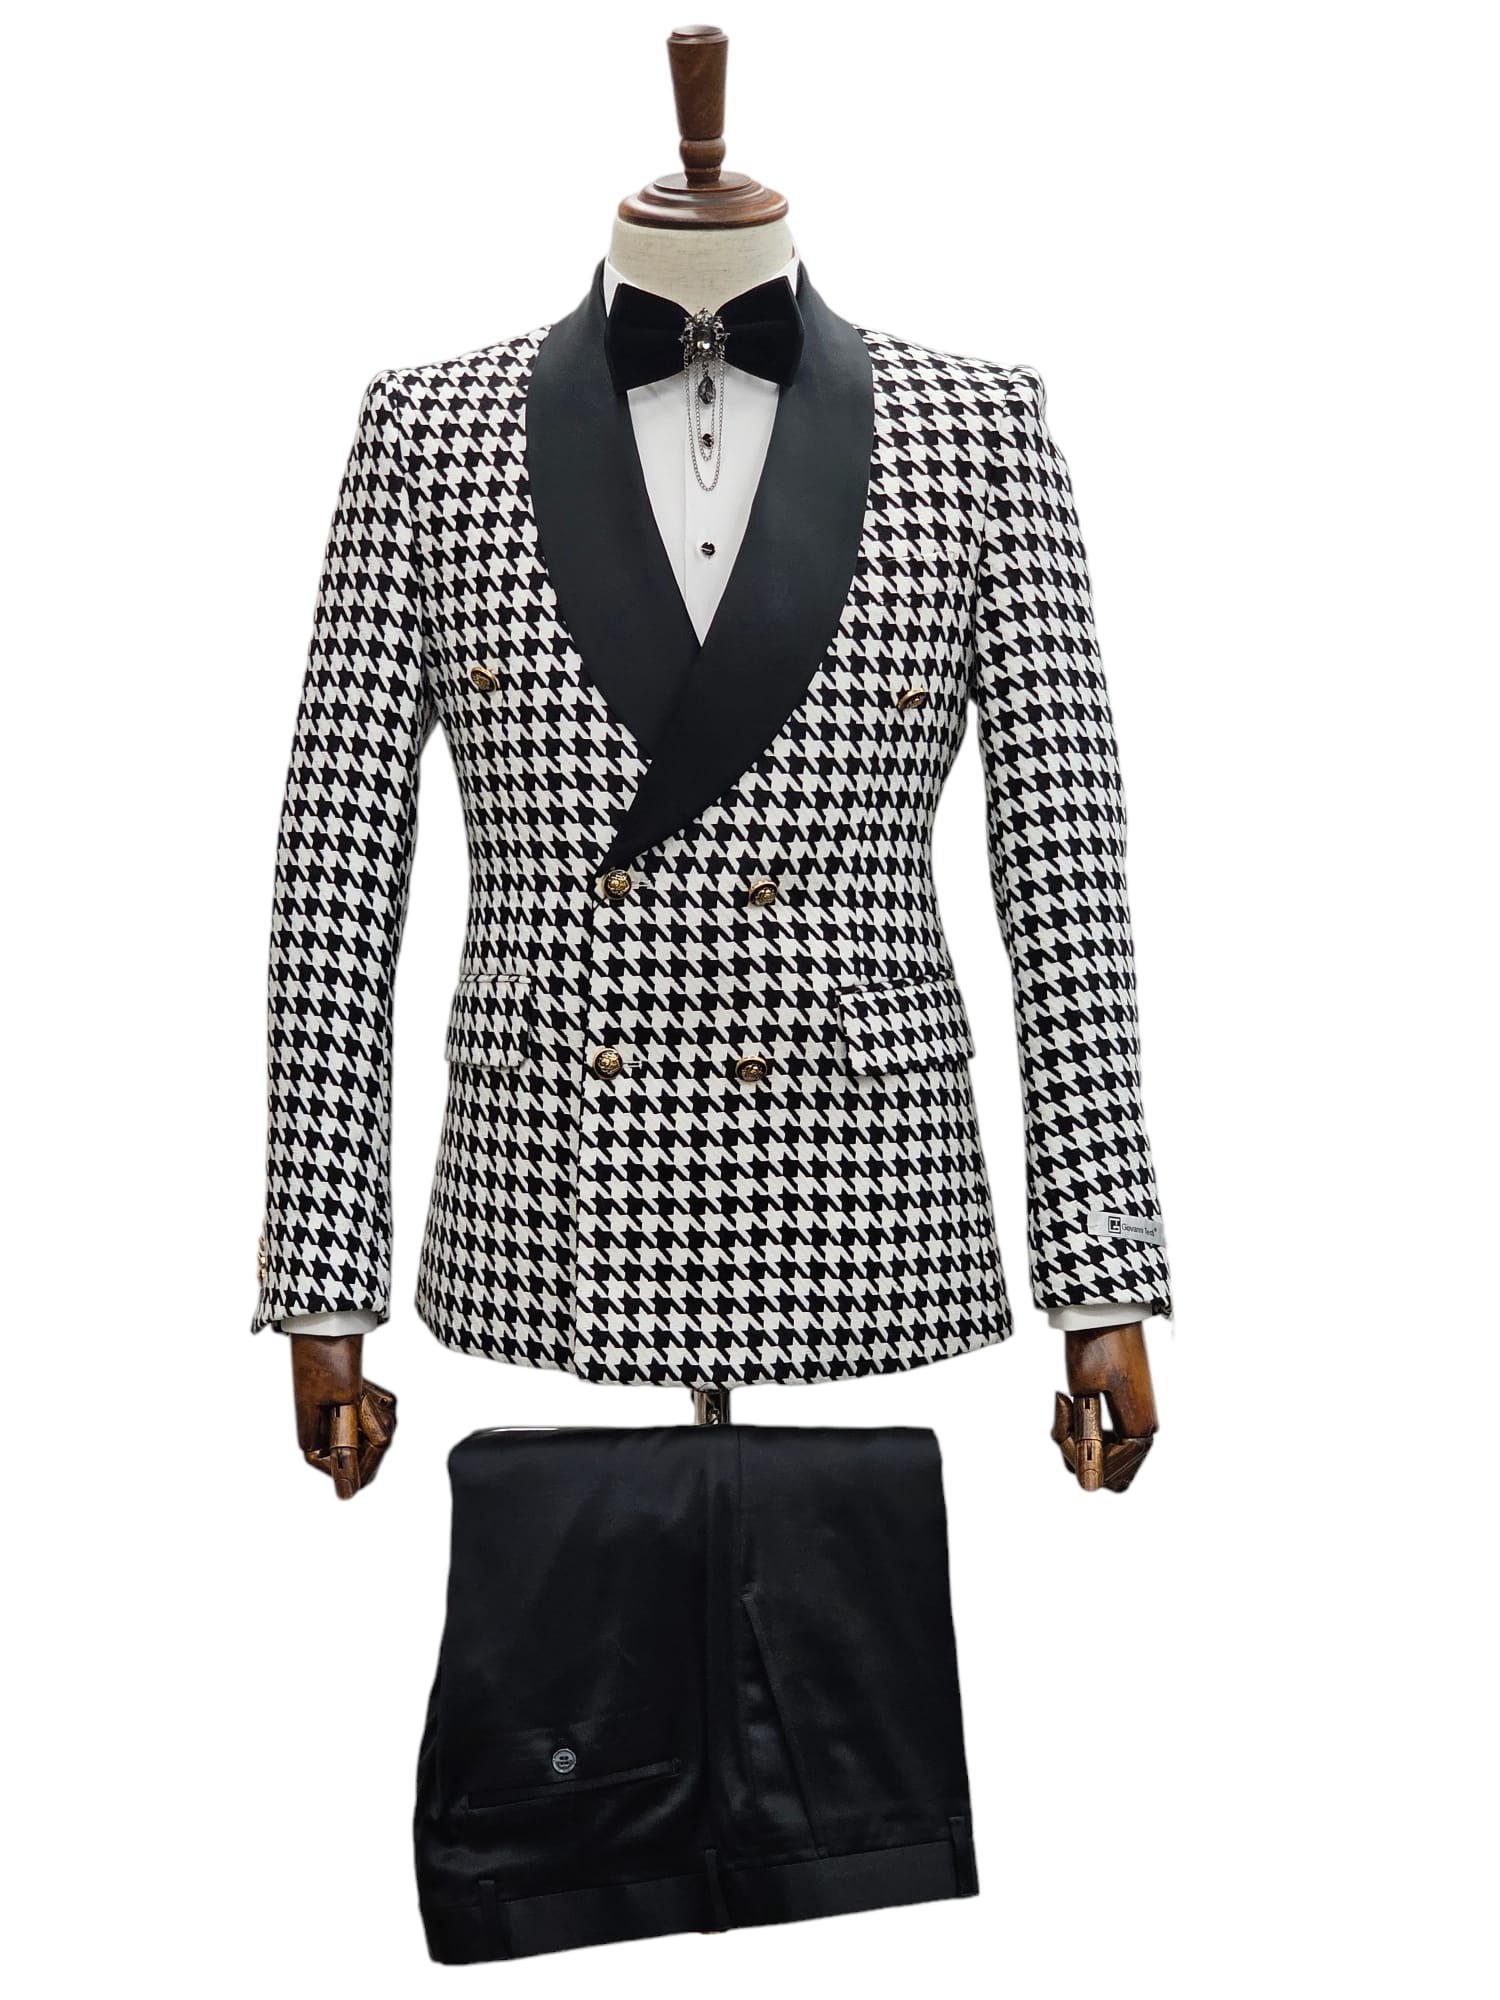 KCT Menswear Double-Breasted Tuxedo - White & Black Design, ideal for weddings and upscale events